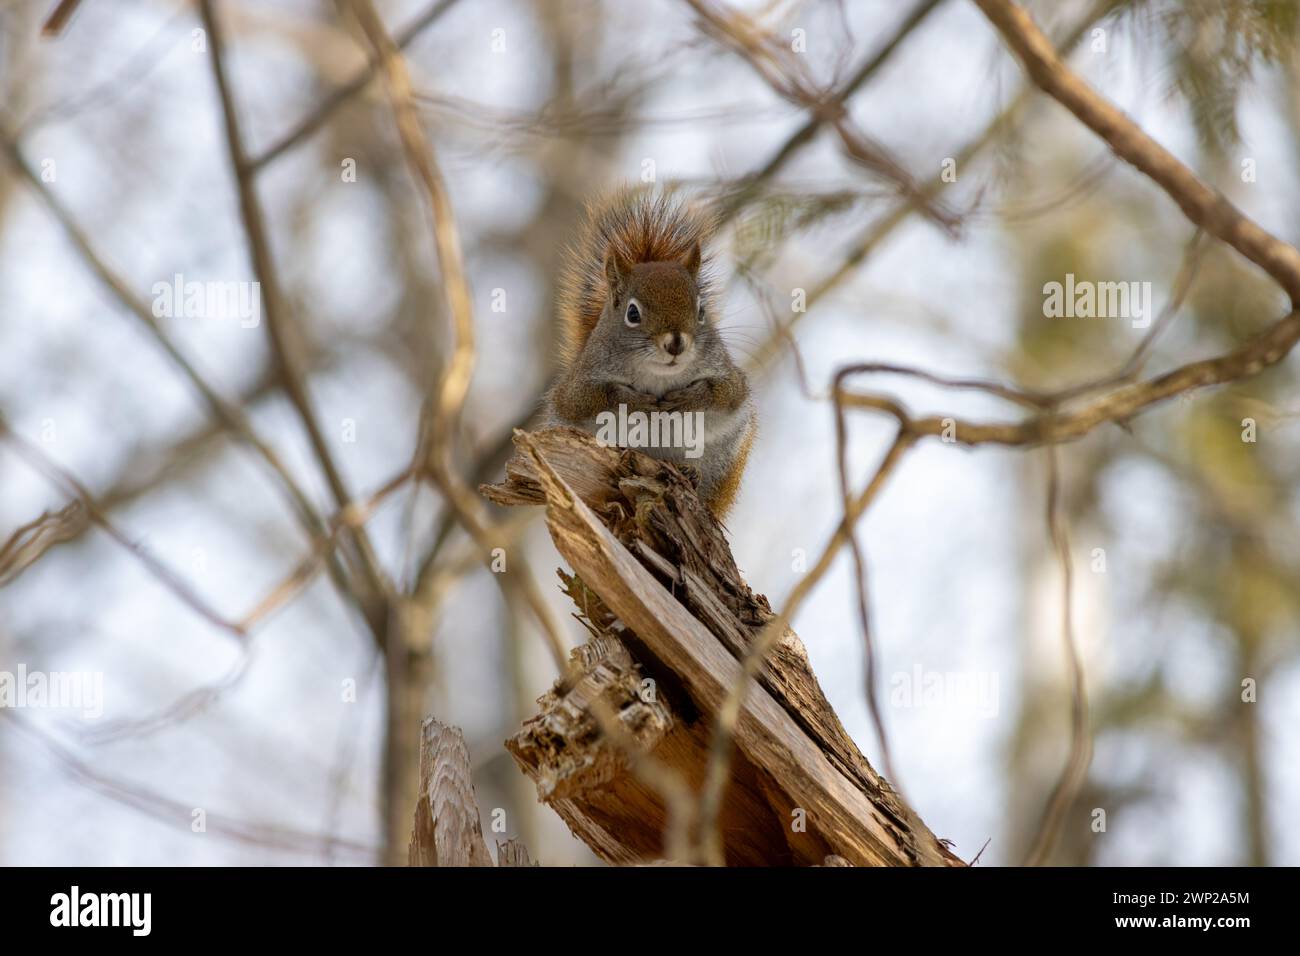 A red squirrel is perched on a snapped tree trunk amidst the vines. Stock Photo